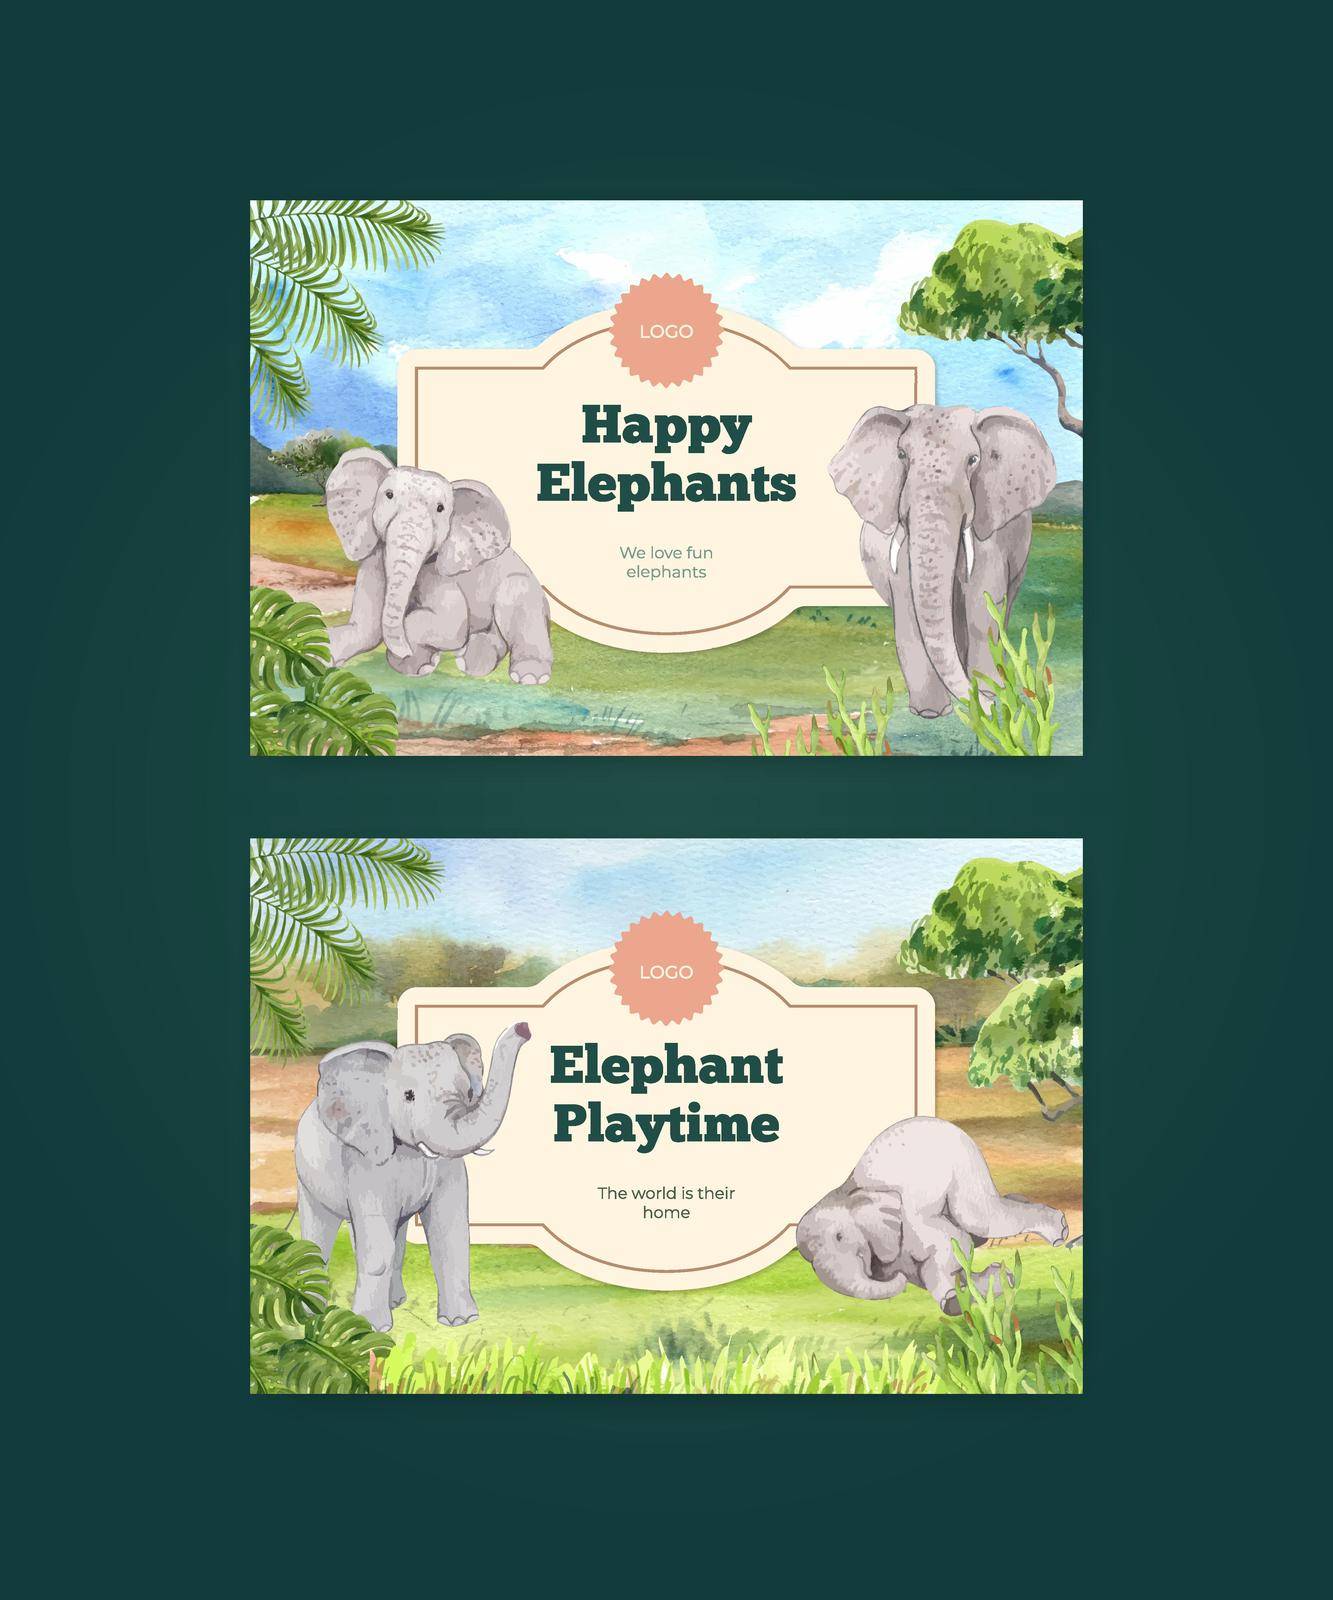 Facebook template with elephant funning concept,watercolor style by Photographeeasia